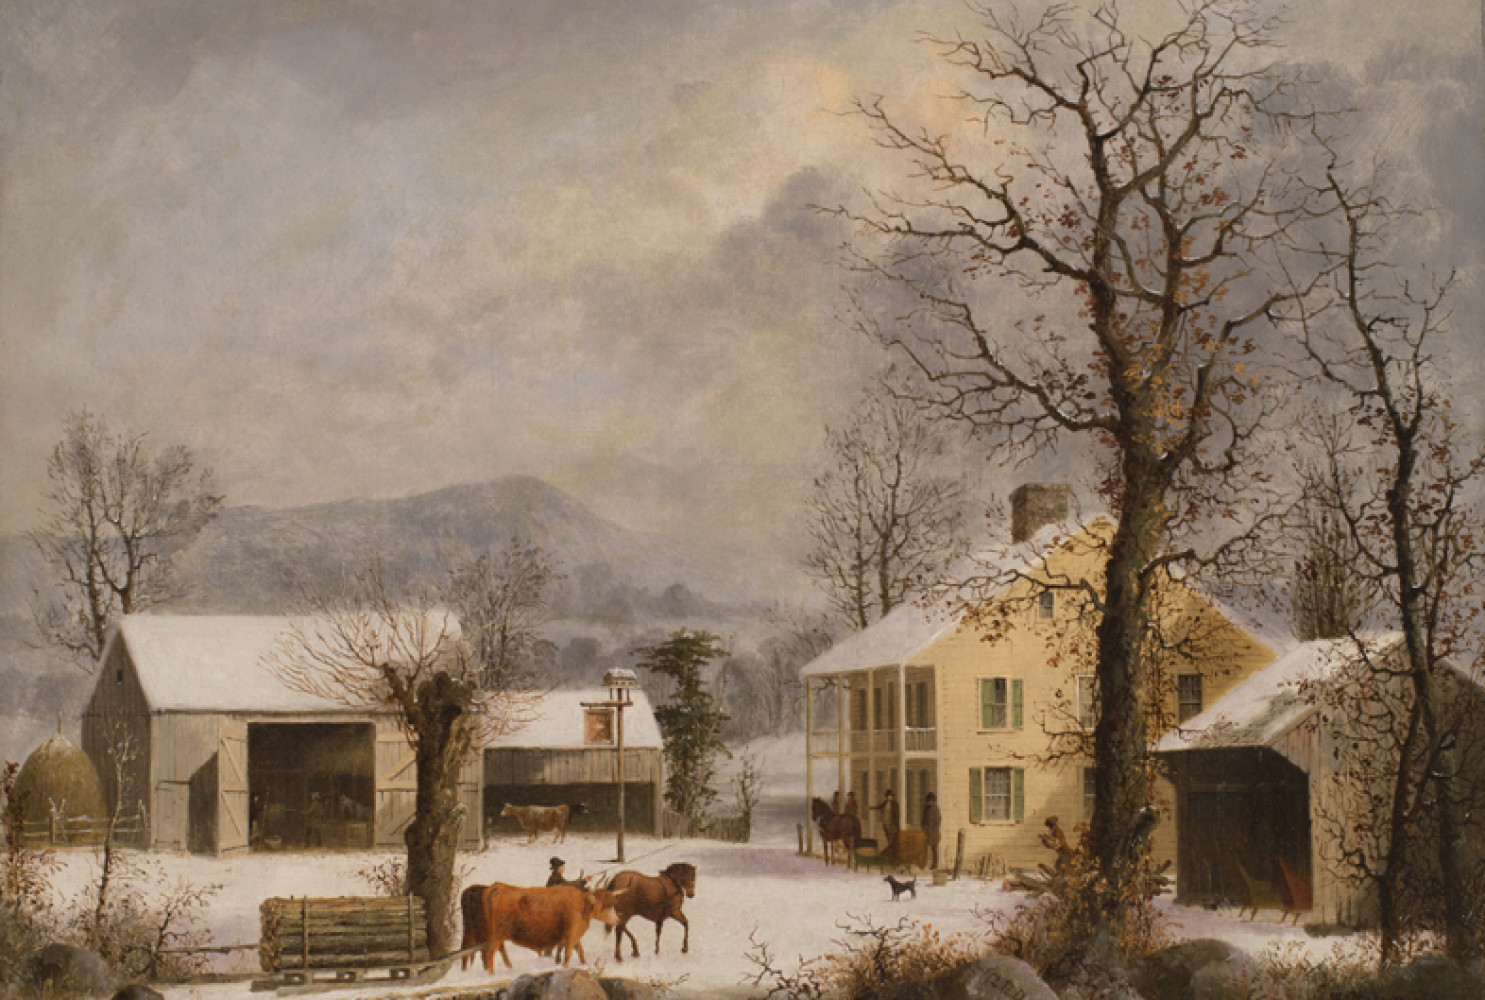 Winter at Jones Inn, ca. 1862, By George Henry Durrie (American, 1820-1863), Oil on canvas, 17.75 x 23.75 inches, Courtesy of the Higdon Collection. 
